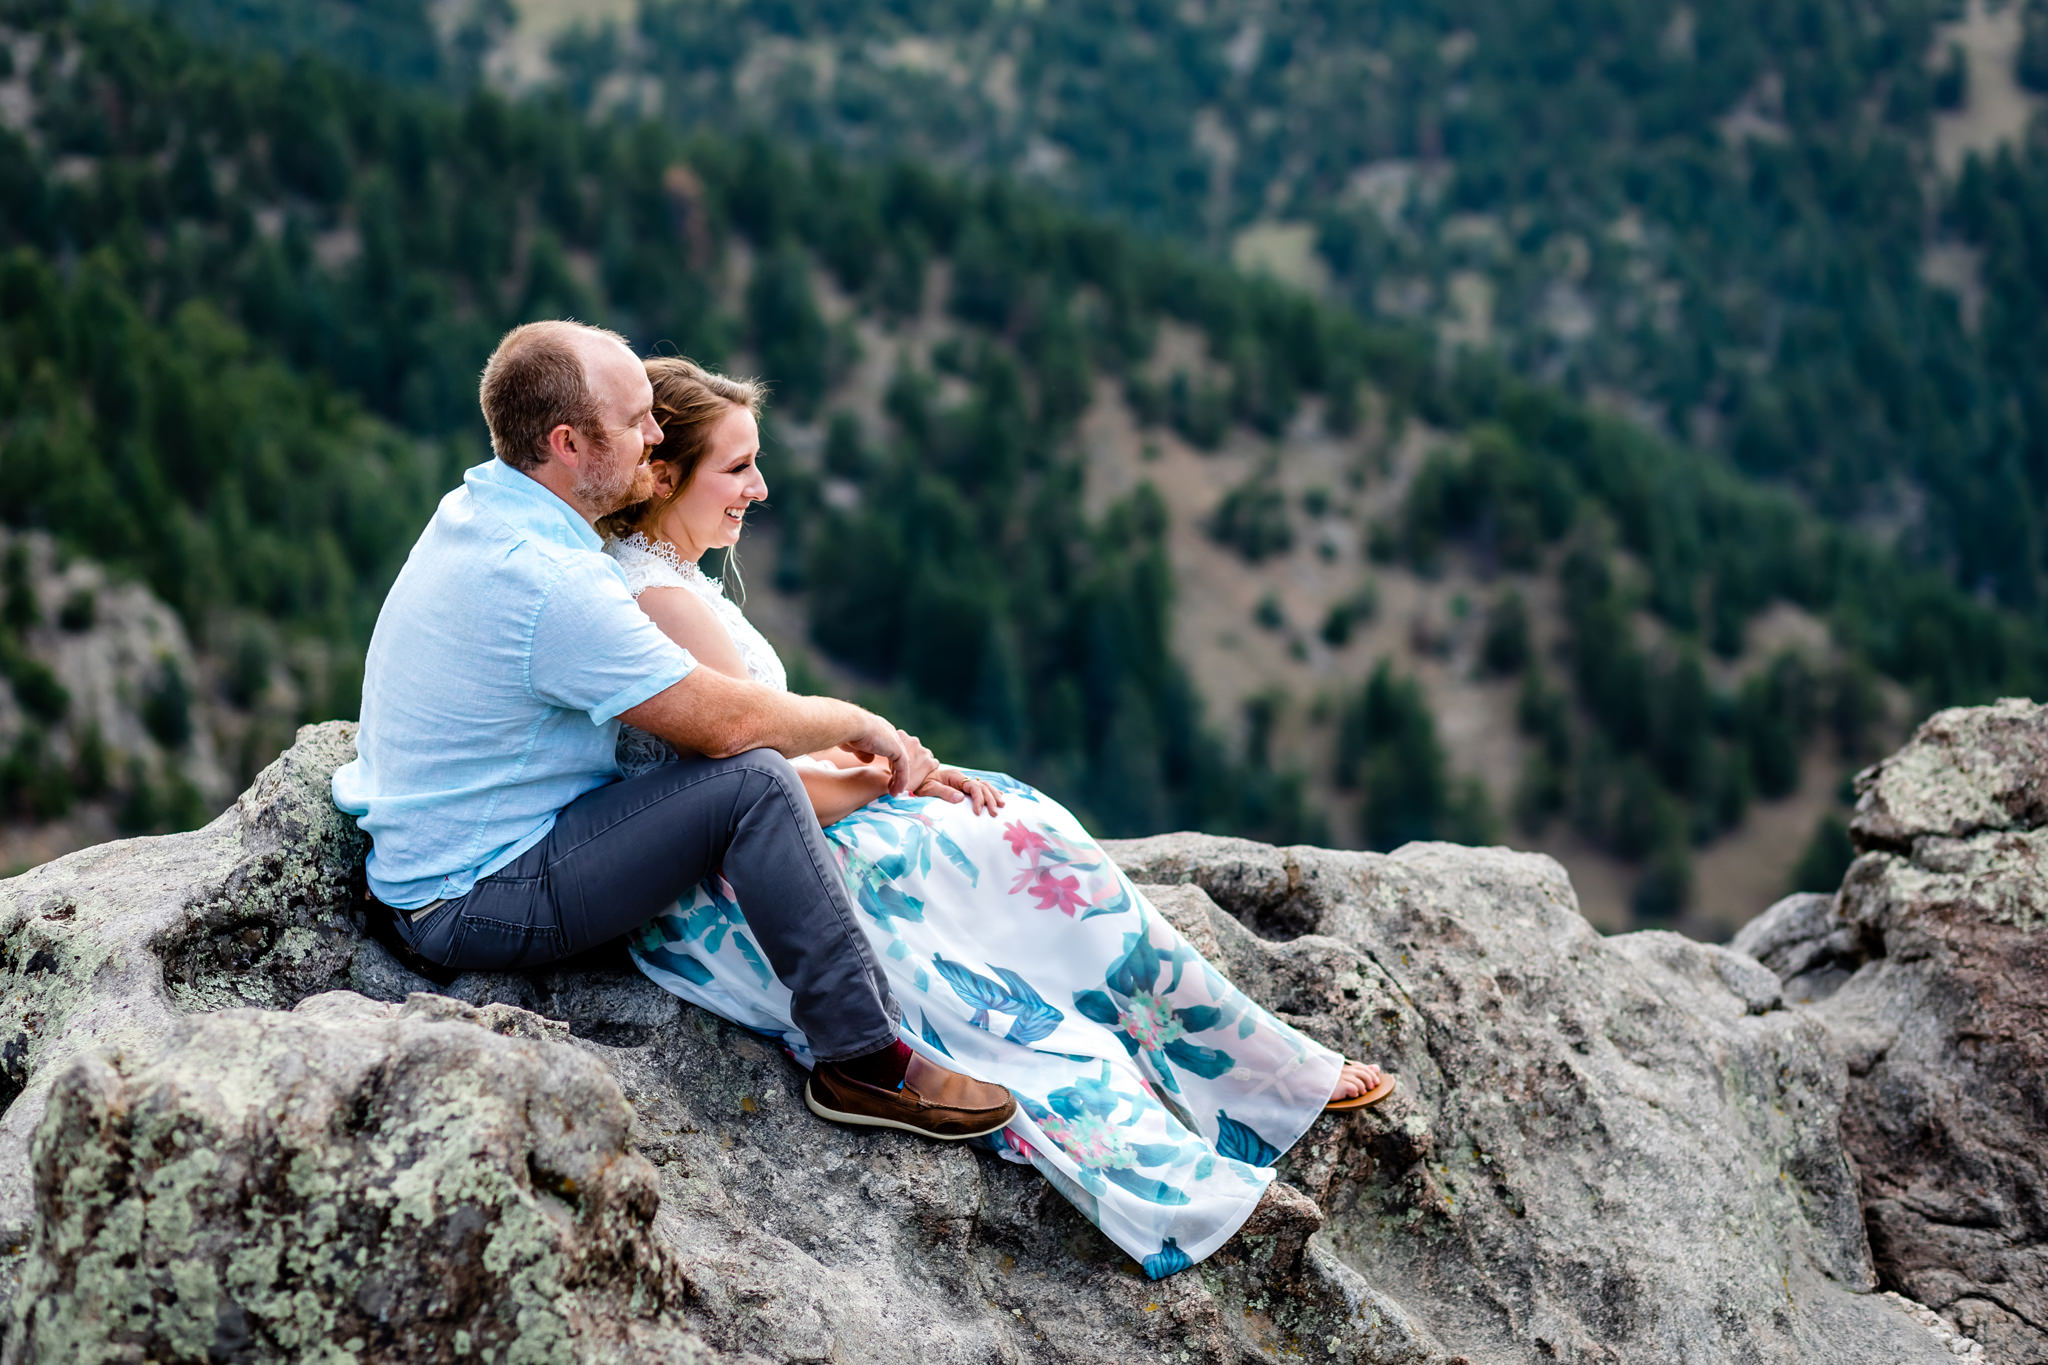 Lauren & Taylor sitting on top of Lost Gulch Overlook looking out over the mountains. Mountain Fall Engagement Session by Colorado Engagement Photographer, Jennifer Garza. Colorado Fall Engagement, Colorado Fall Engagement Photos, Fall Engagement Photography, Fall Engagement Photos, Colorado Engagement Photographer, Colorado Engagement Photography, Mountain Engagement Photographer, Mountain Engagement, Mountain Engagement Photos, Rocky Mountain Bride, Wedding Inspo, Wedding Season, Colorado Wedding, Colorado Bride, Bride to Be, Couples Goals